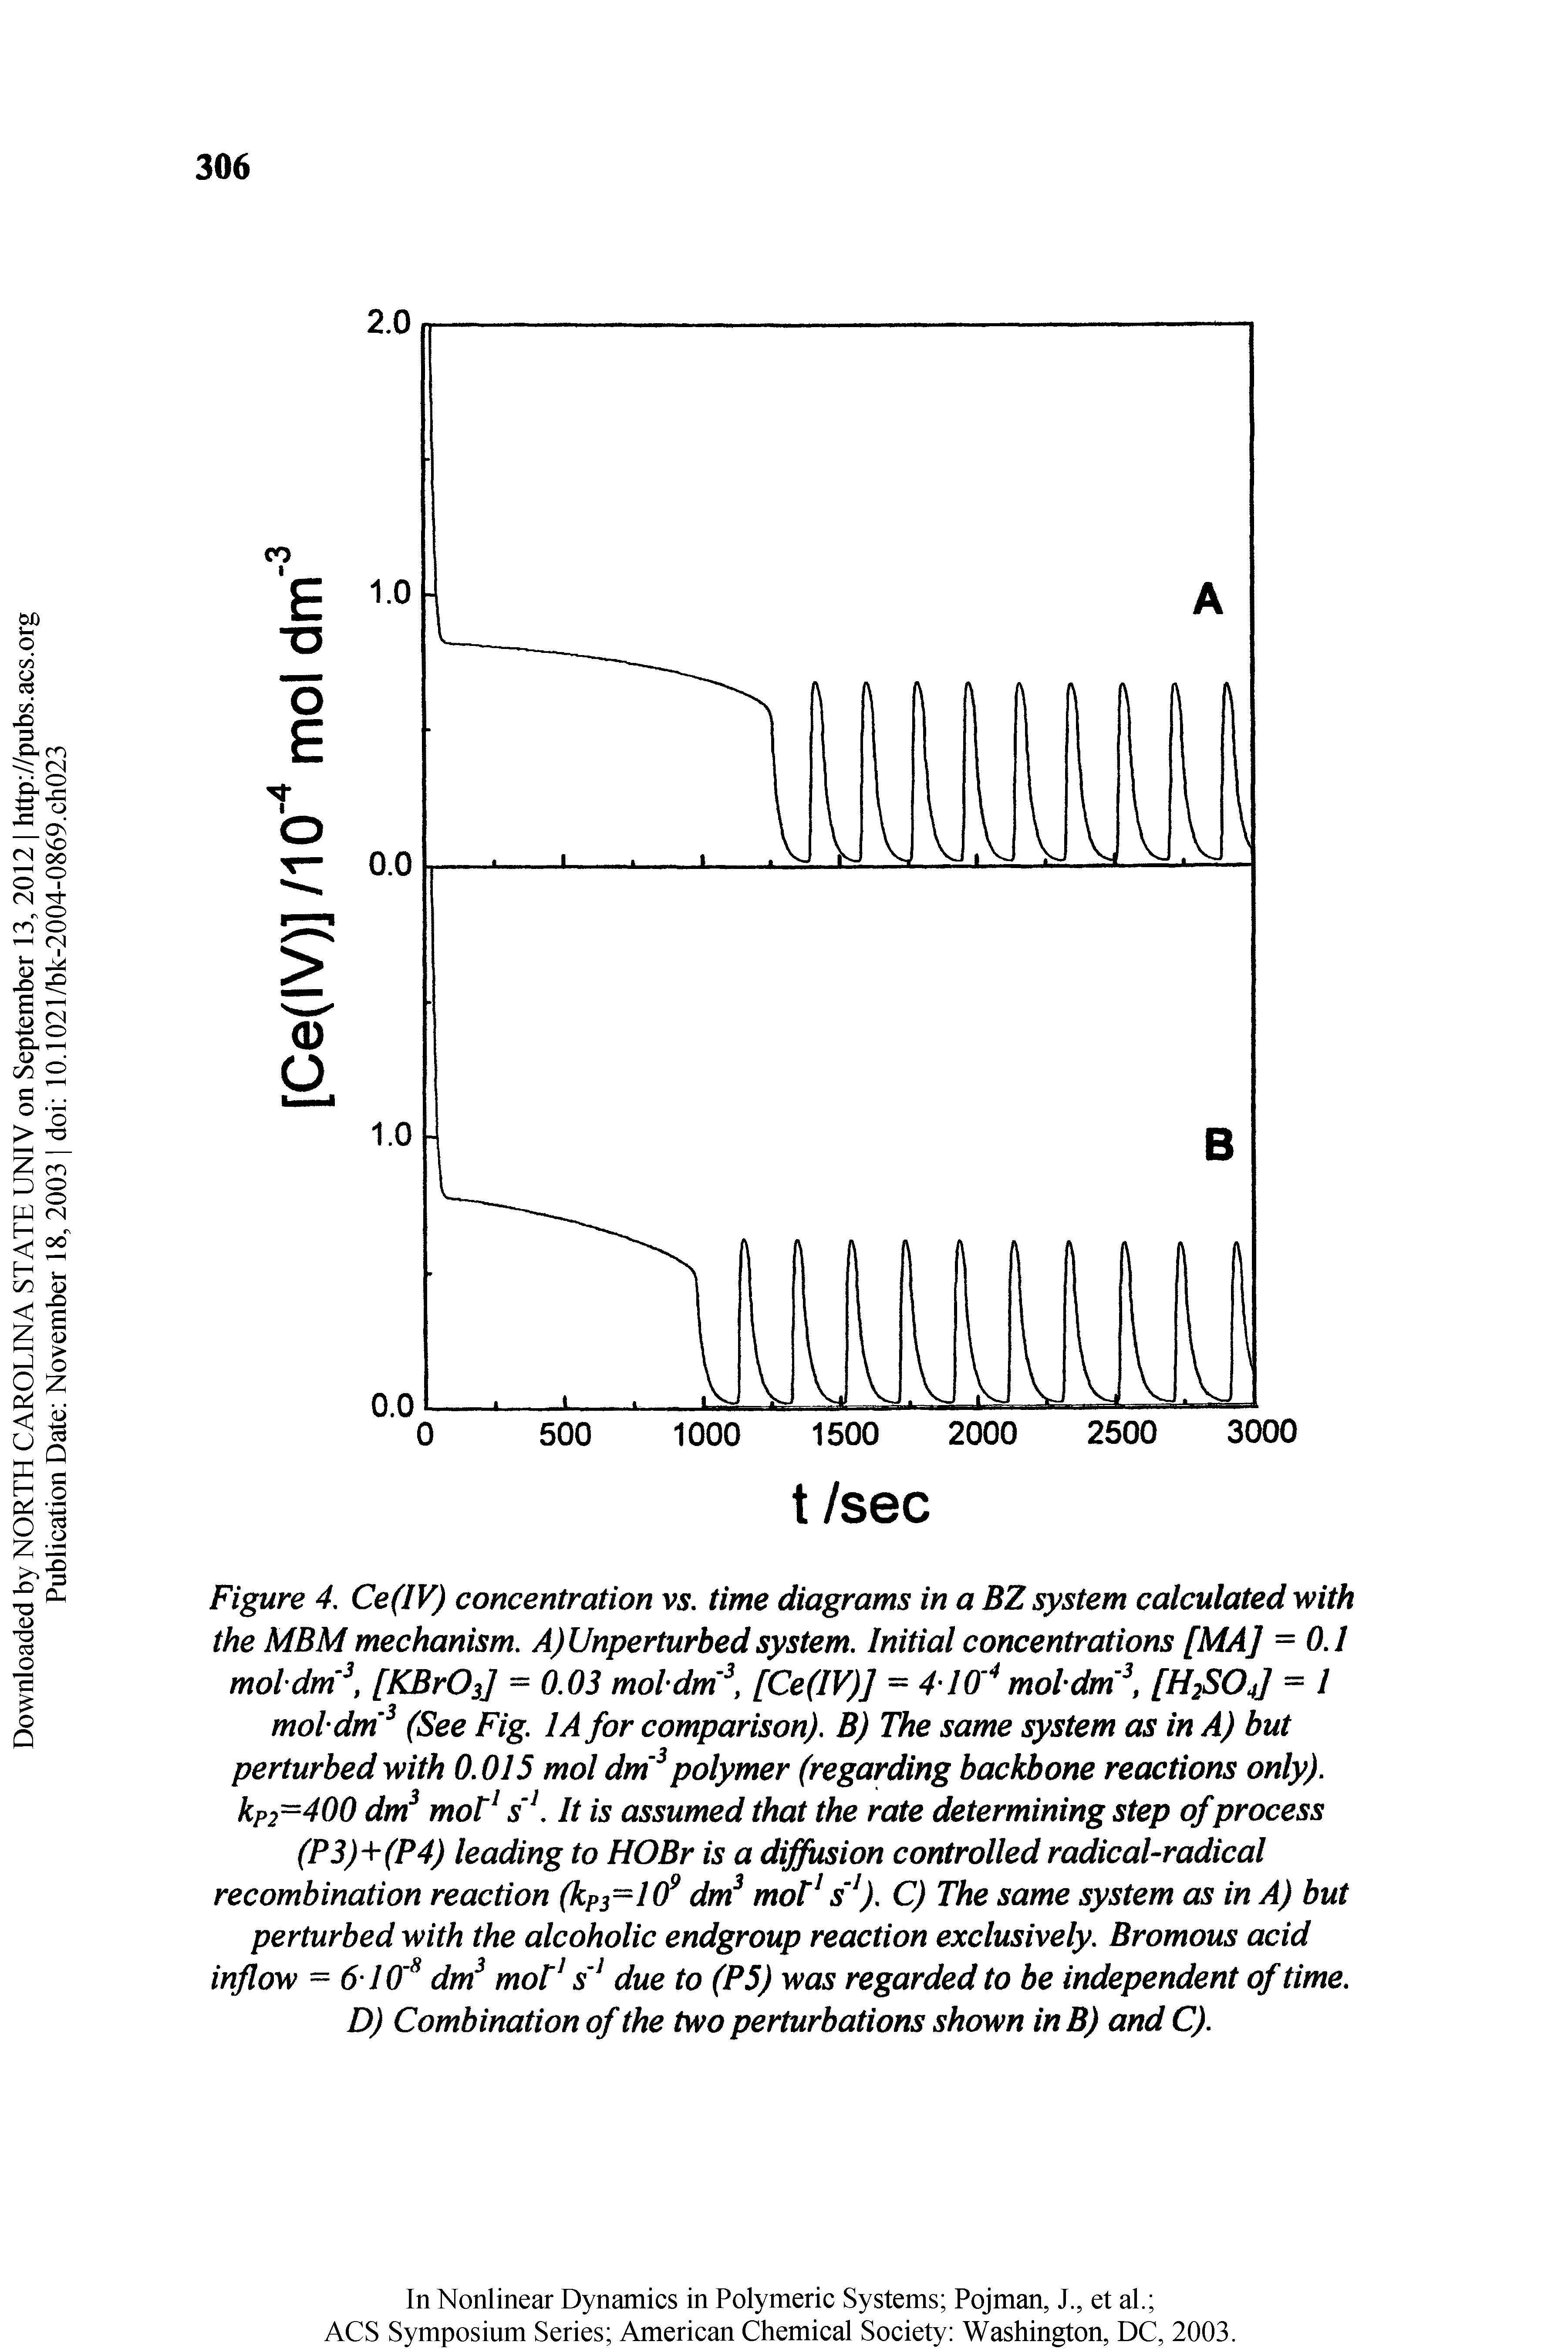 Figure 4, Ce(IV) concentration vs. time diagrams in a BZ system calculated with the MBM mechanism. A) Unperturbed system. Initial concentrations [MA] = 0.1 moldm [KBrOs] = 0.03 moldm, [Ce(lV)J = 410 moldm [H2SO4] = / mohdm (See Fig. lA for comparison). B) The same system as in A) but perturbed with 0.015 mol dm polymer (regarding backbone reactions only). kp2= 400 dm mot s It is assumed that the rate determining step of process (P3)+(P4) leading to HOBr is a diffusion controlled radical-radical recombination reaction (kp3=l(f dm mol s ). C) The same system as in A) but perturbed with the alcoholic endgroup reaction exclusively. Bromous acid inflow = 6 10 dm mor s due to (P5) was regarded to be independent of time. D) Combination of the two perturbations shown in B) and C).